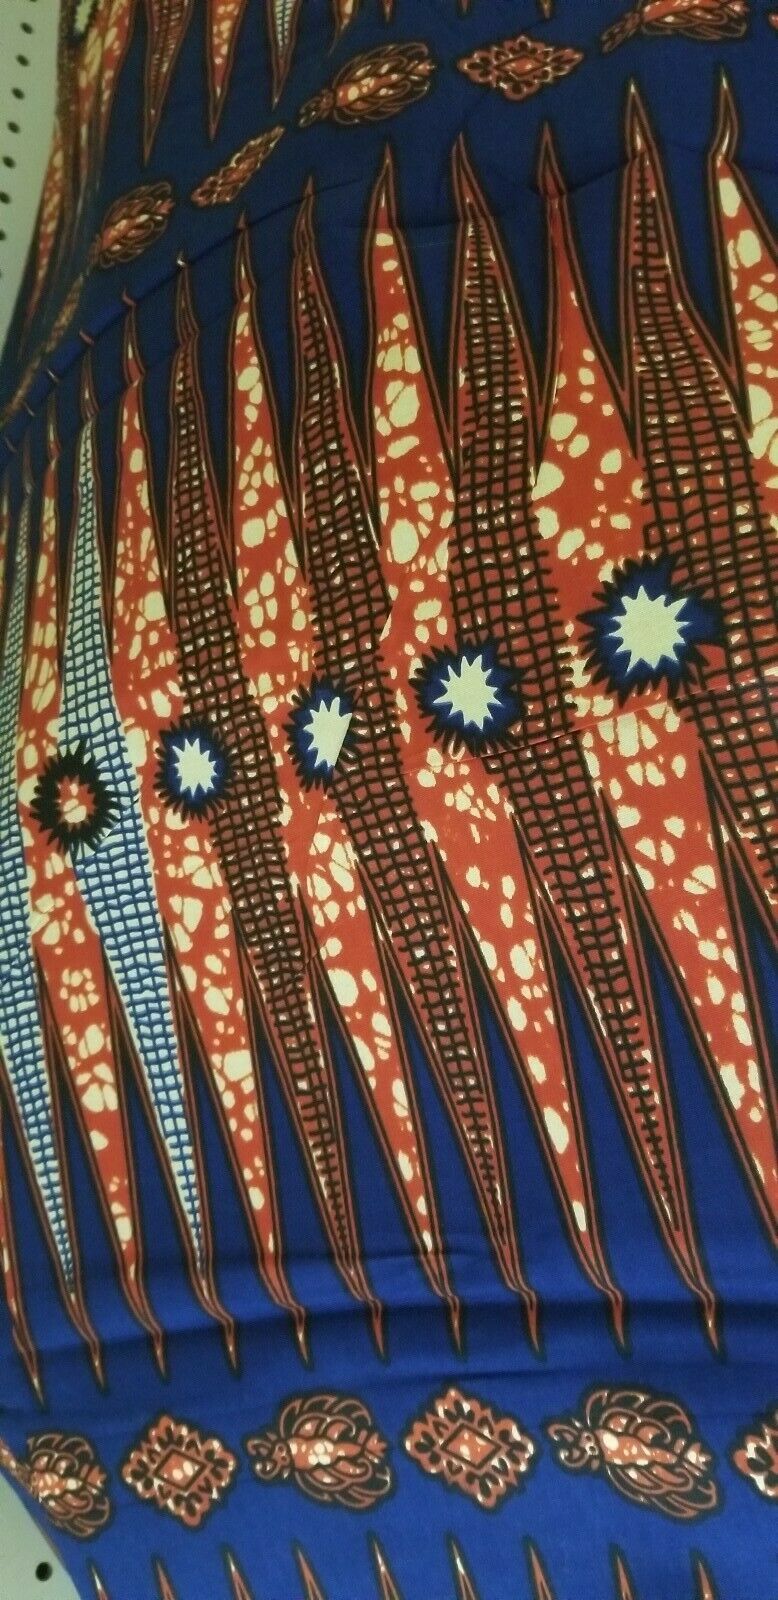 MULTICOLOR African Wax Print 100% Cotton Fabric (44 in.) 6yrds $30